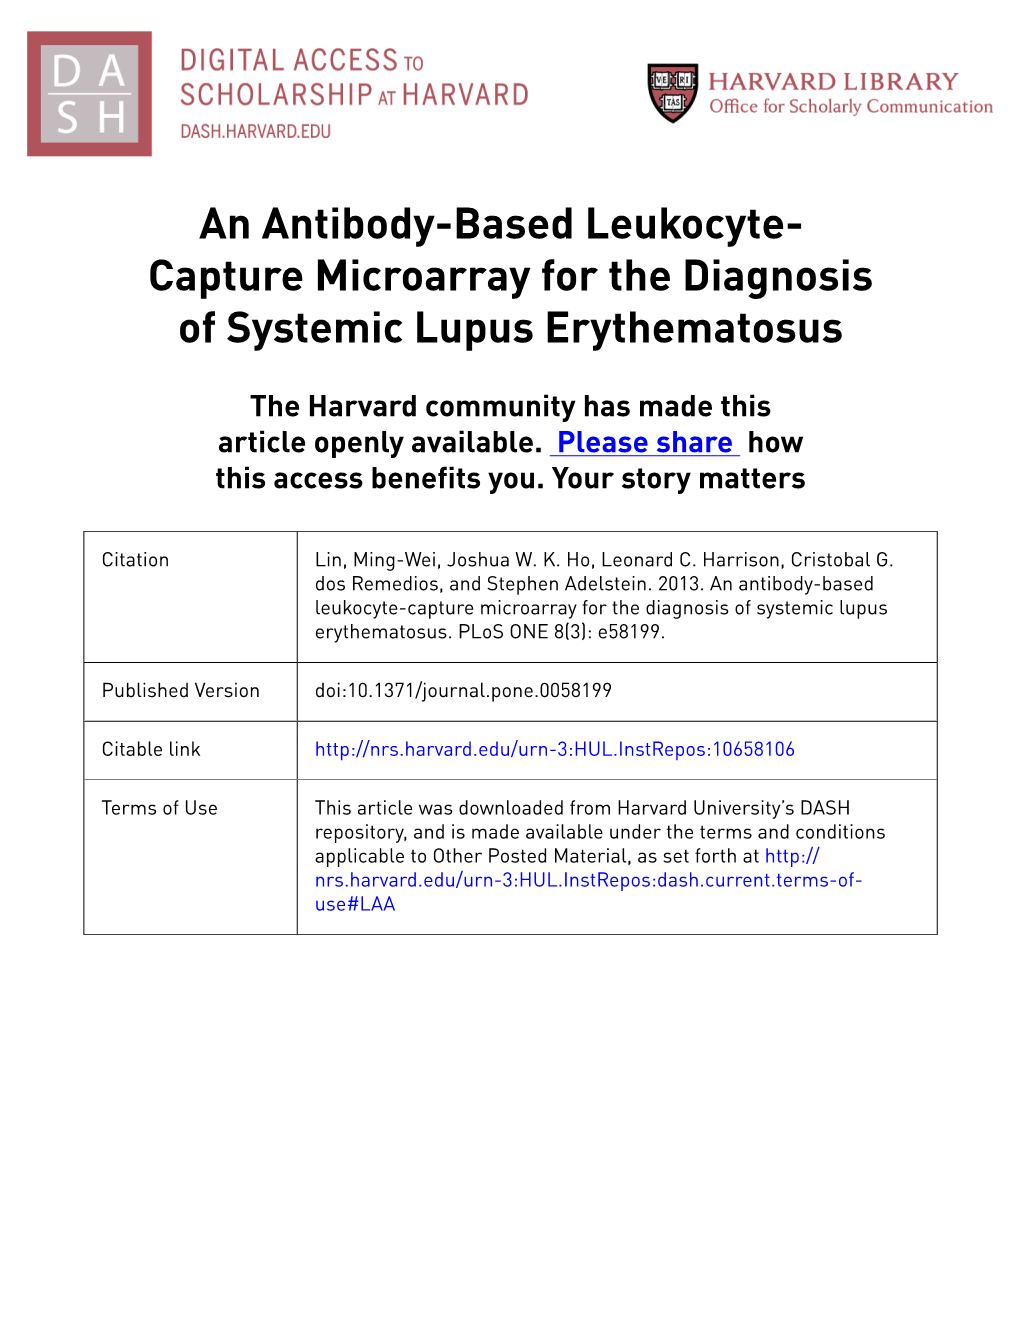 Capture Microarray for the Diagnosis of Systemic Lupus Erythematosus